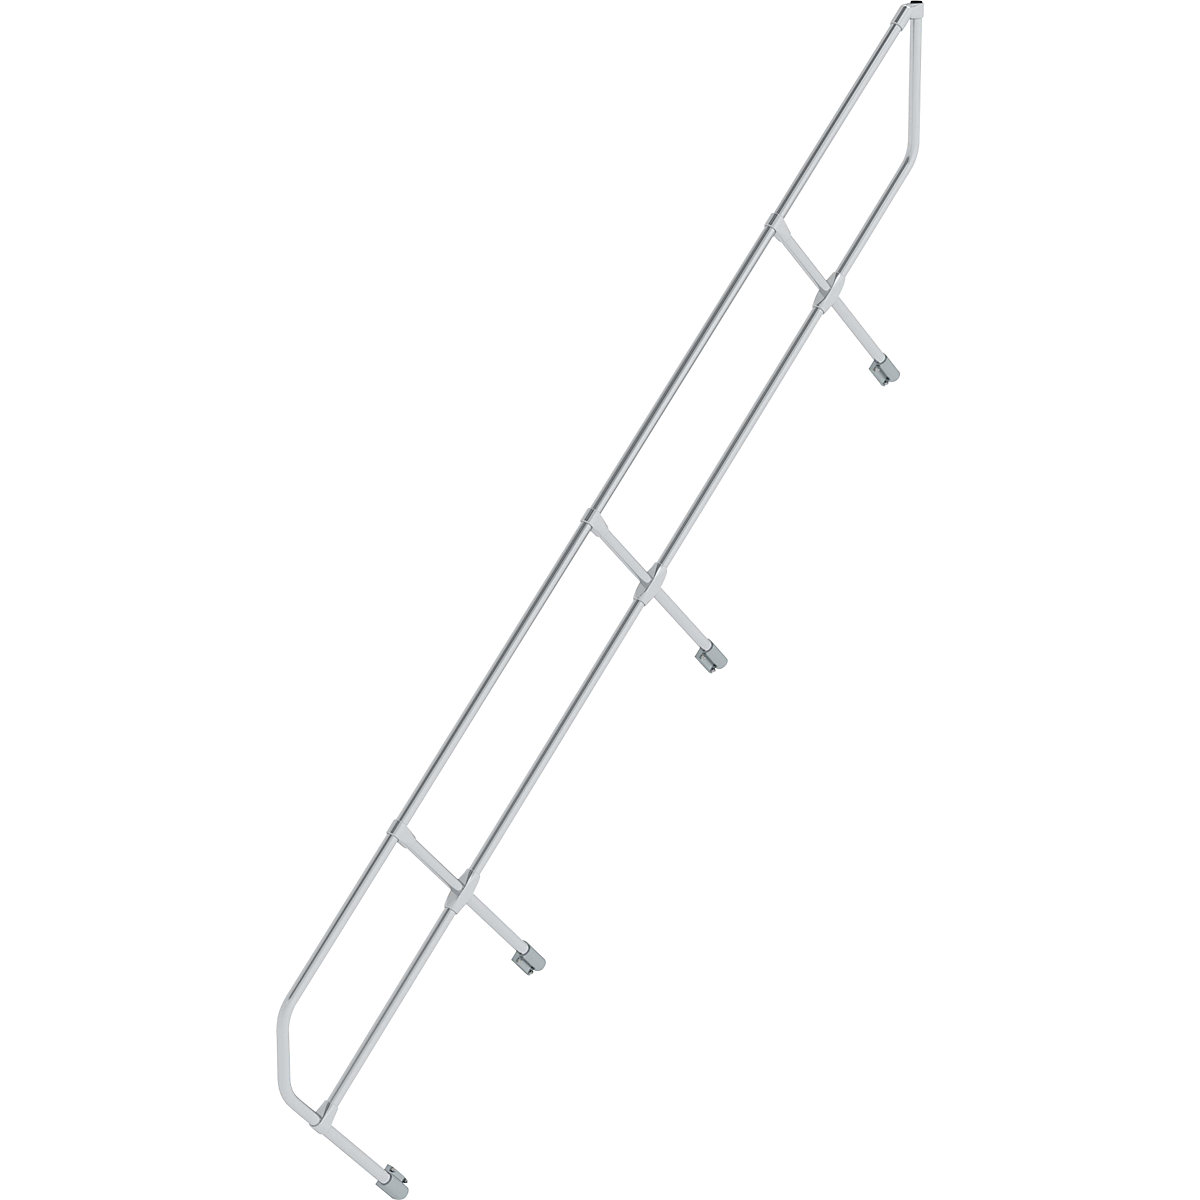 Second railing – MUNK, for industrial steps with a 45° slope, 12 steps-3